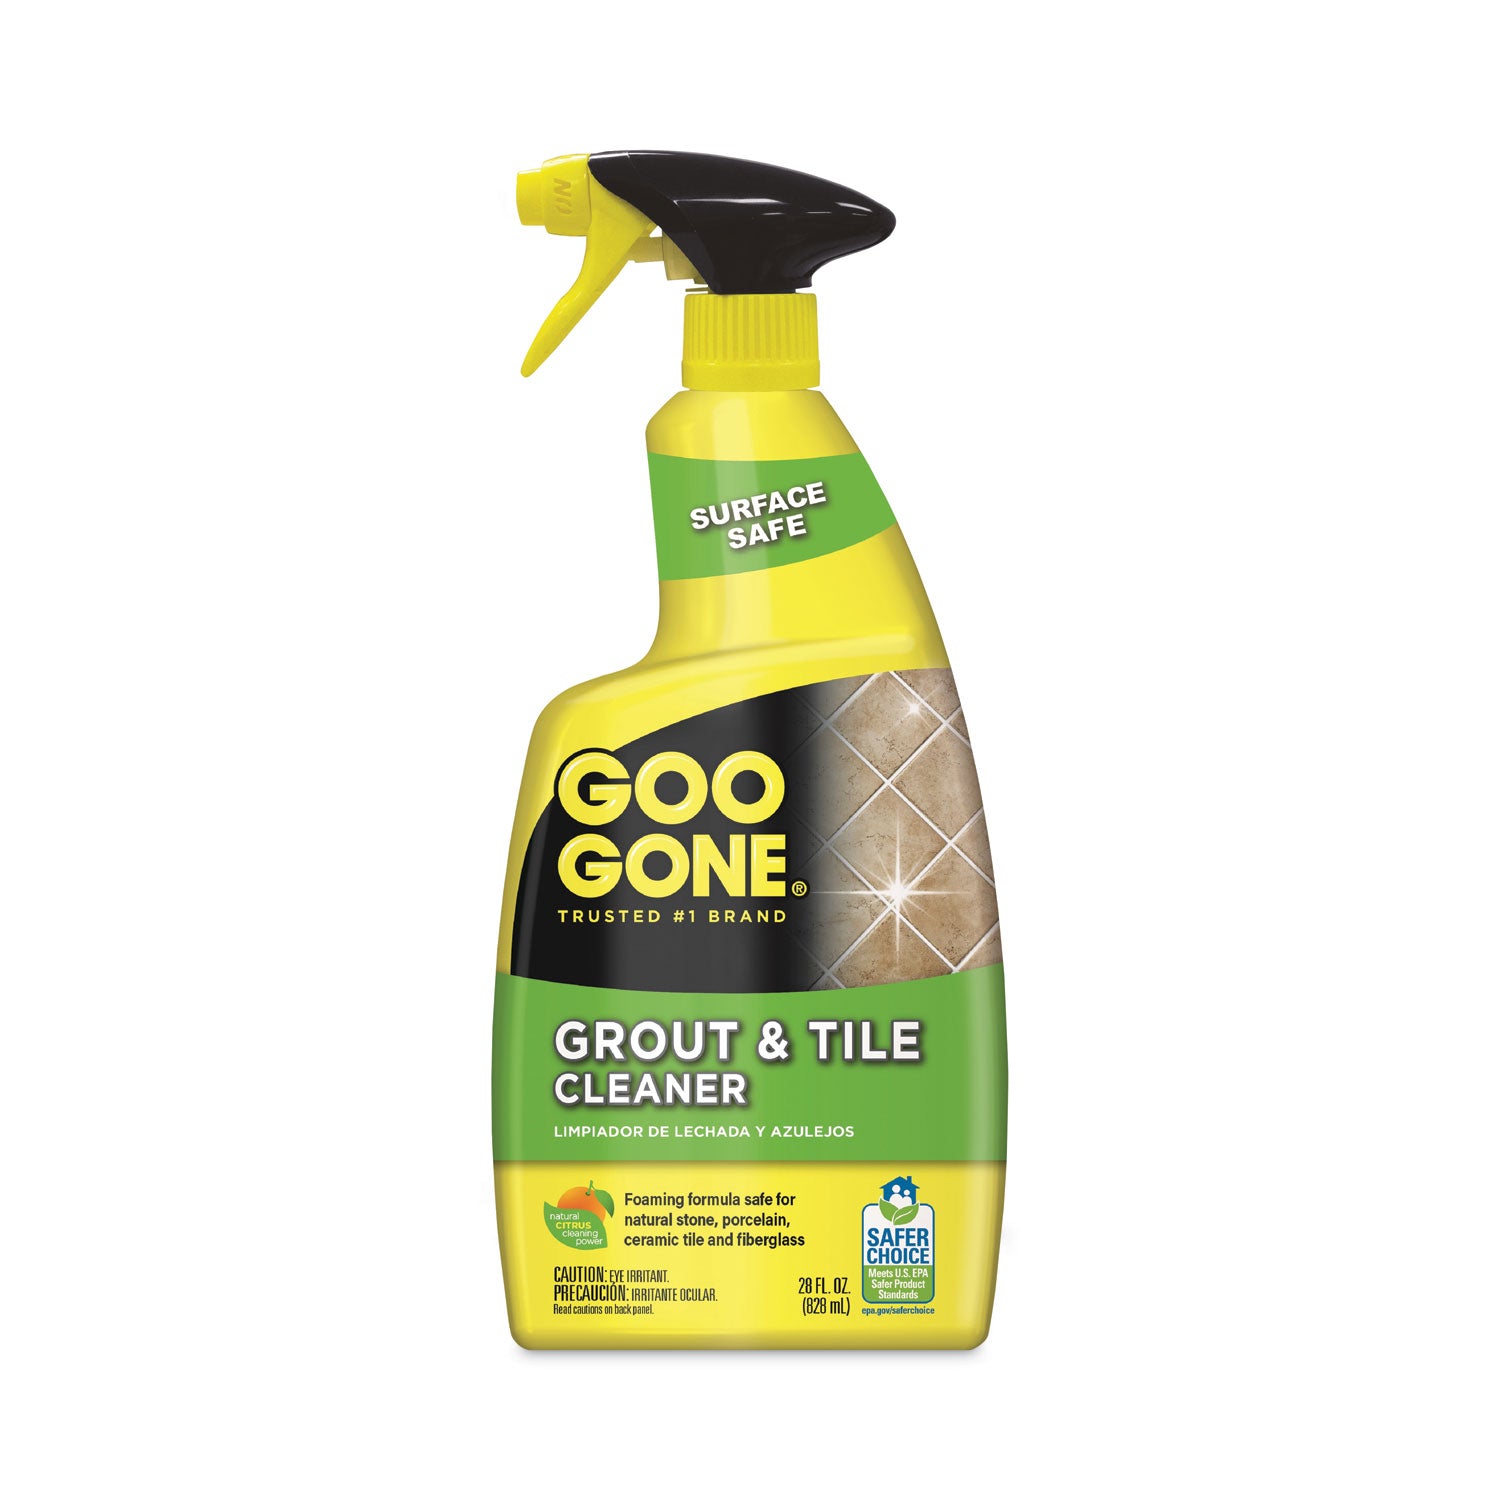 grout-and-tile-cleaner-citrus-scent-28-oz-trigger-spray-bottle-6-ct_wmn2054a - 1